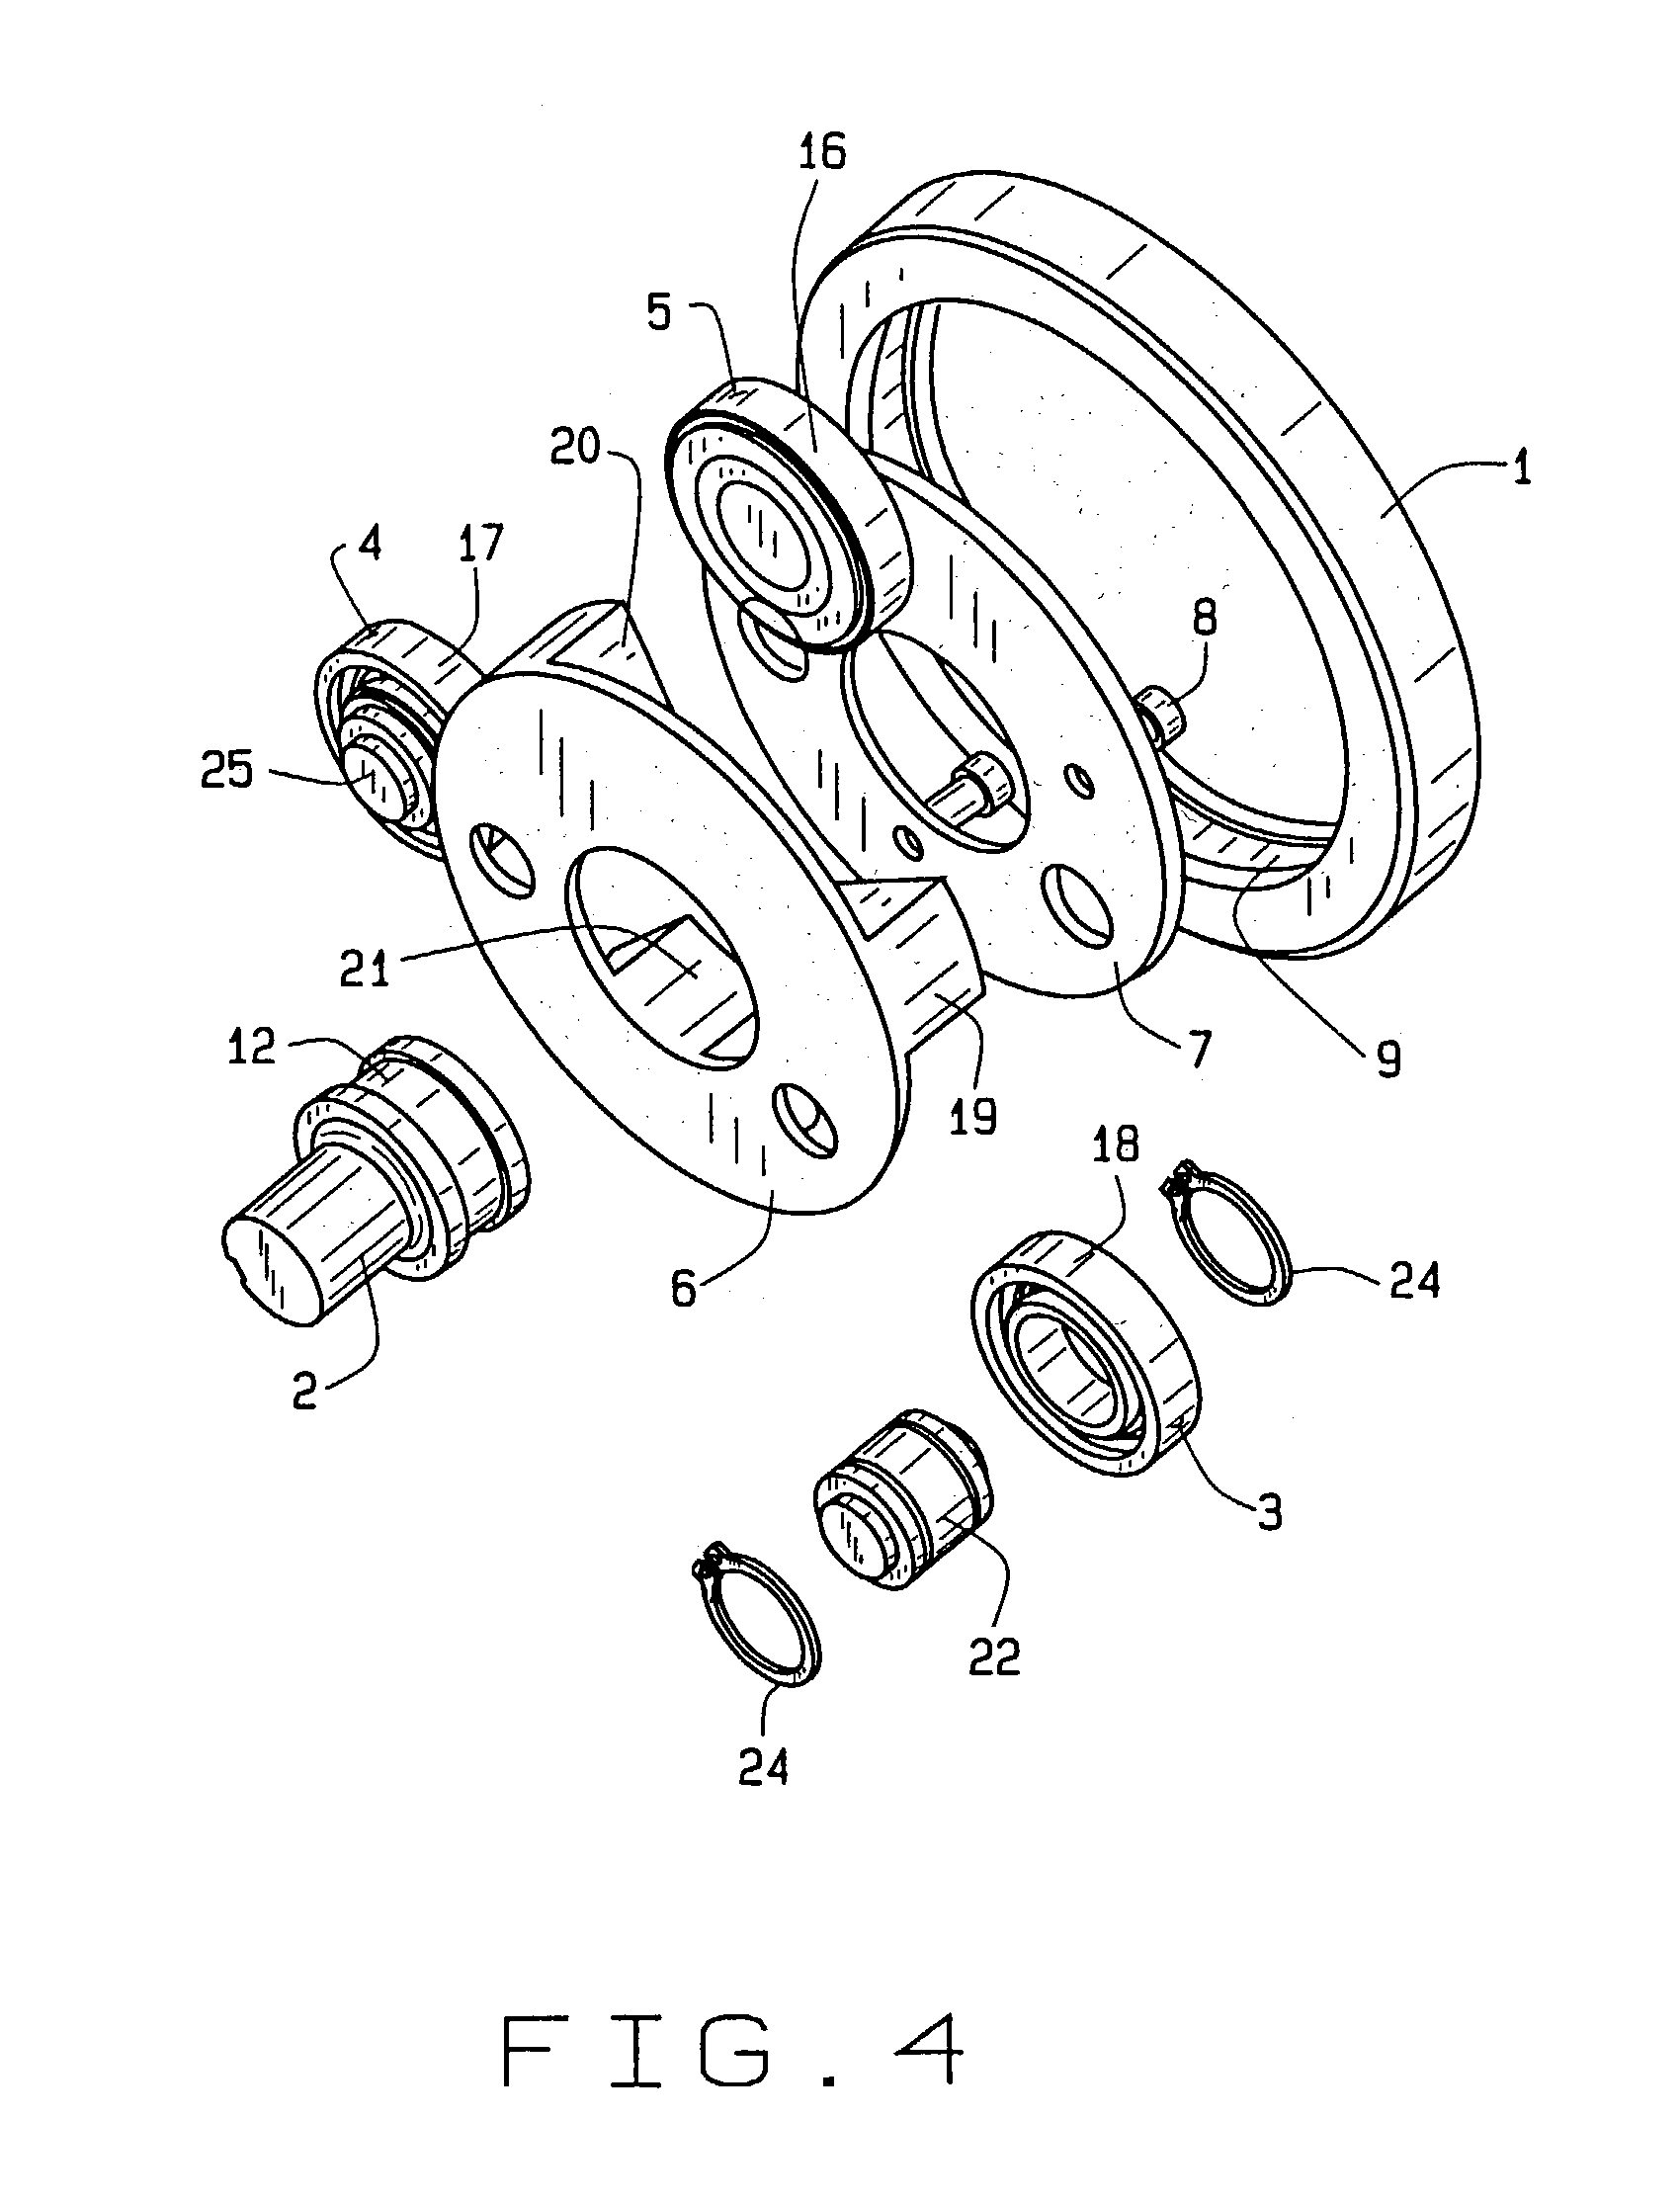 Eccentric planetary traction drive transmission with flexible roller for adaptive self-loading mechanism